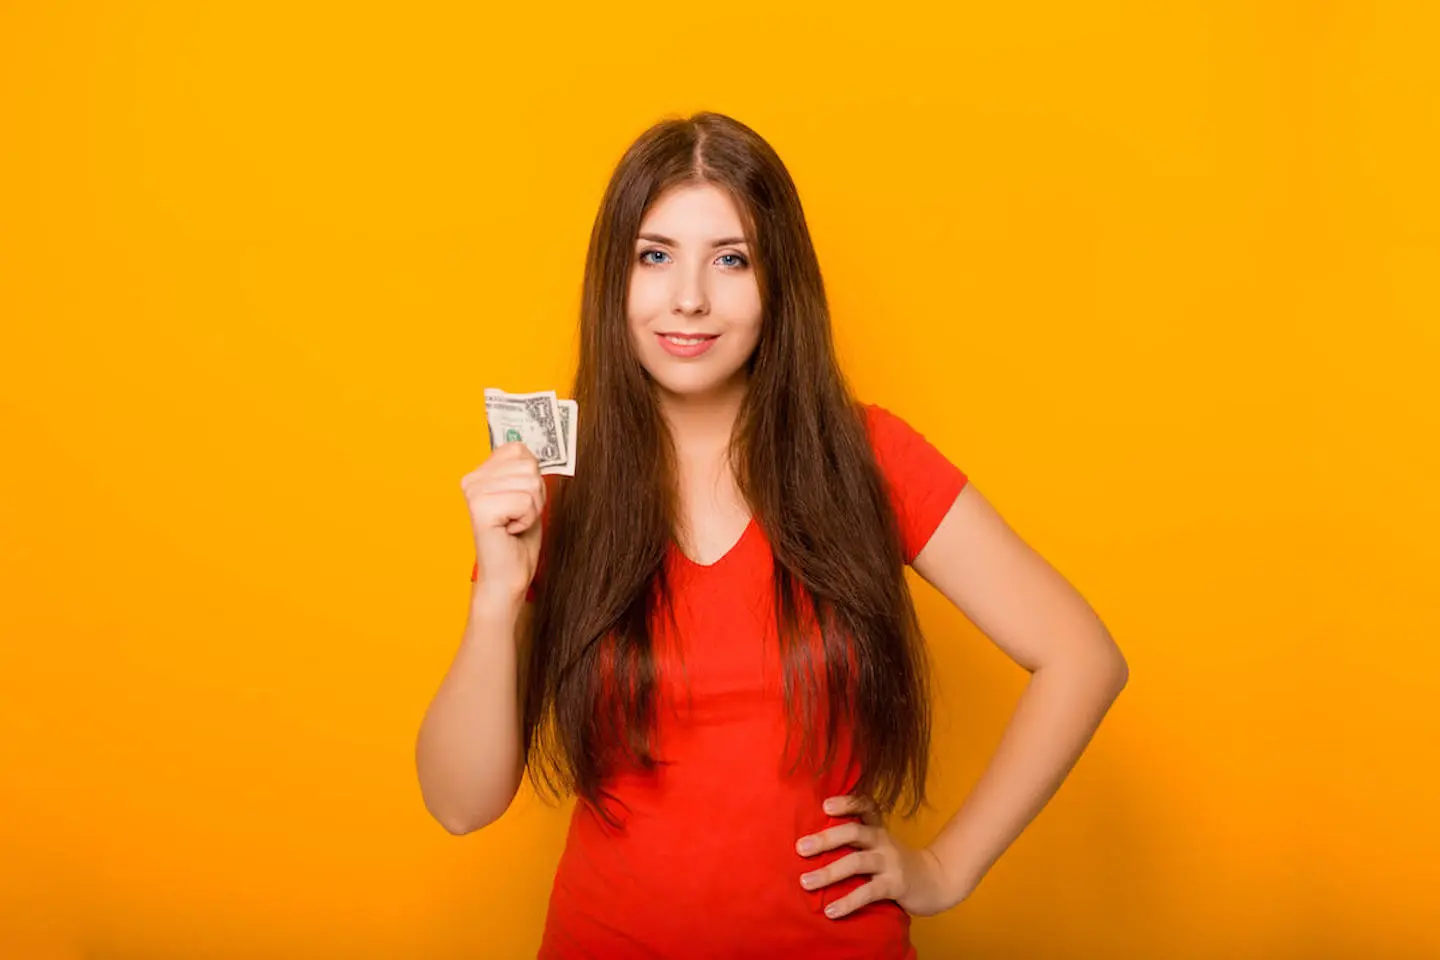 How much is capital gains tax: woman holding a dollar